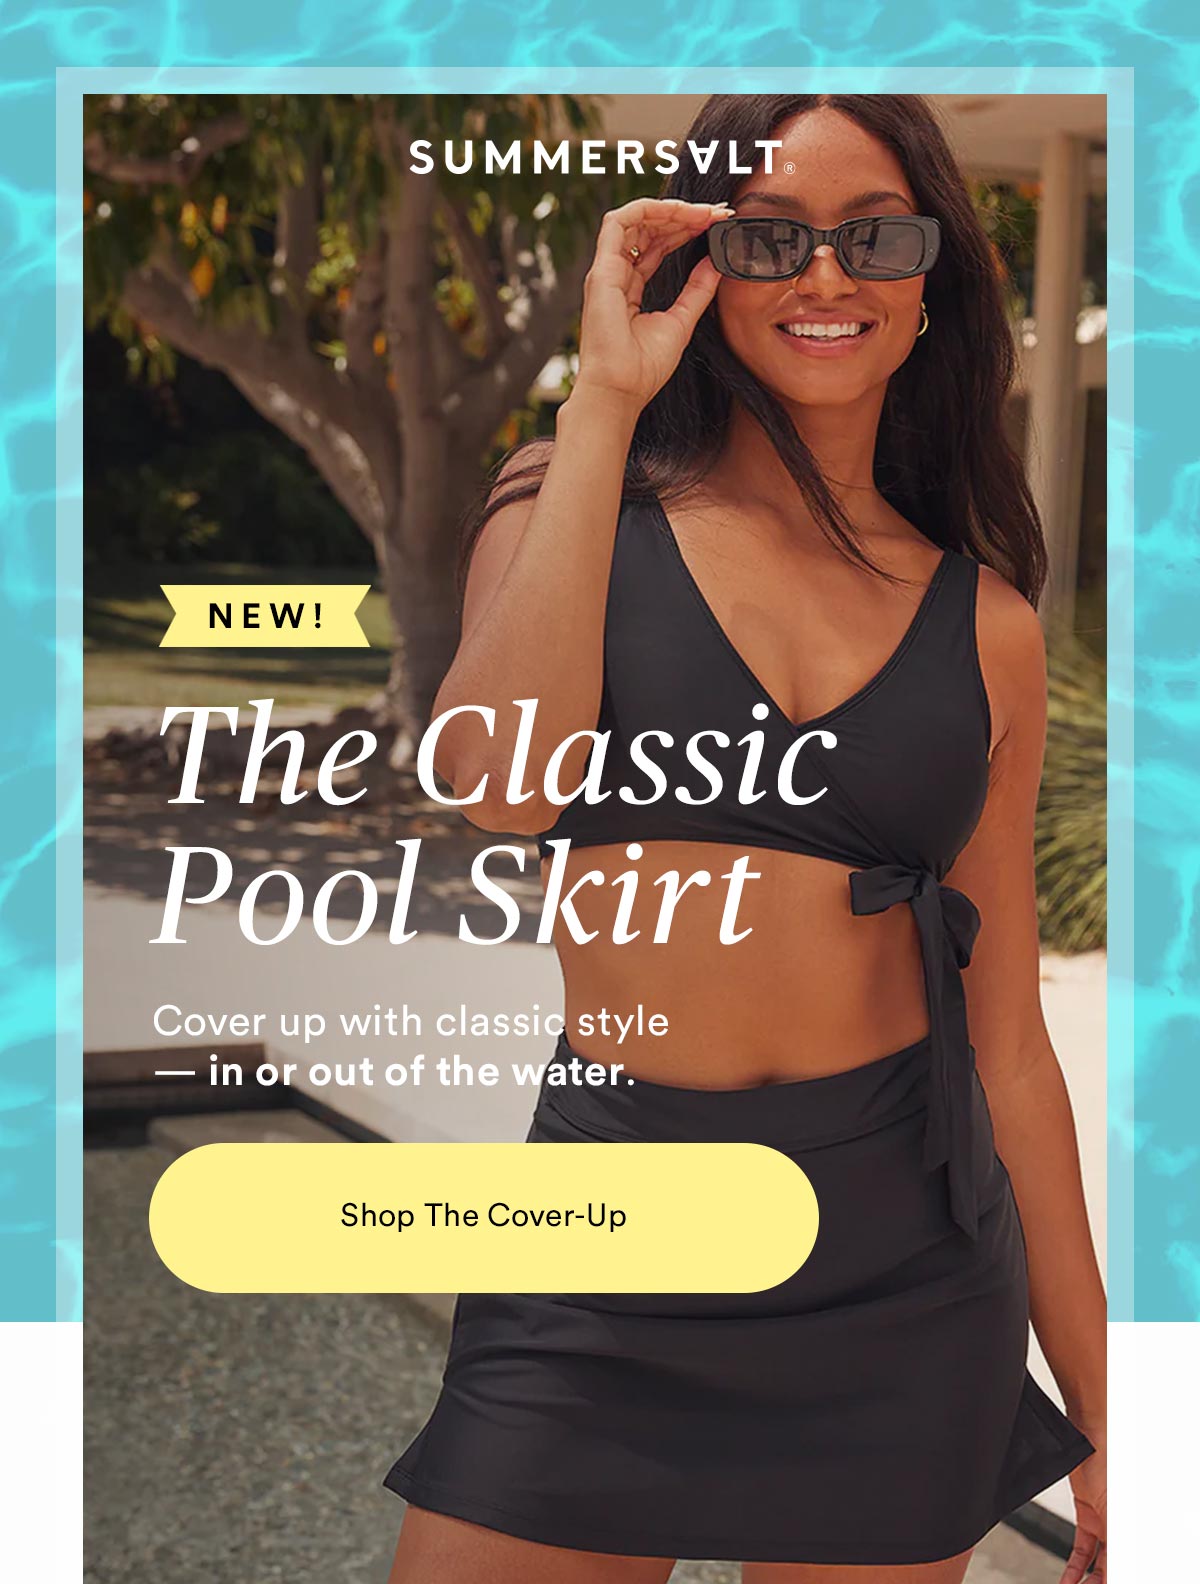 The Classic Pool Skirt. Cover up with classic style - in or out of the water. Lifestyle image of woman wearing The Classic Pool Skirt.